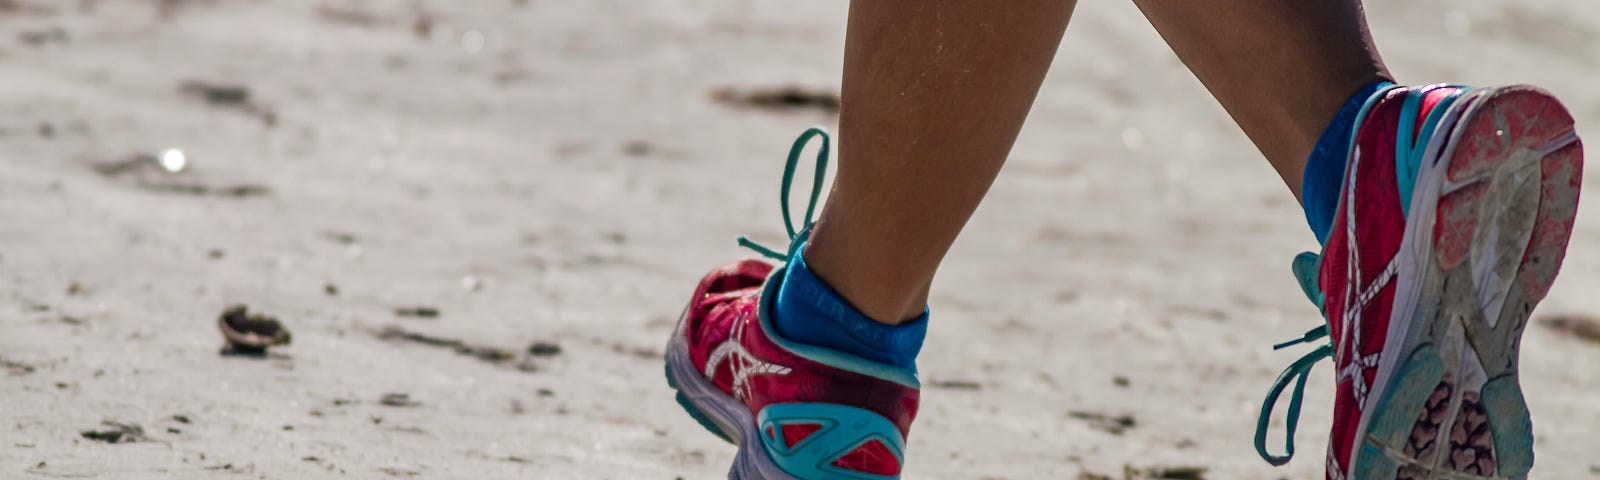 The legs of a woman shown running on a beach wearing pink and blue tennis shoes.